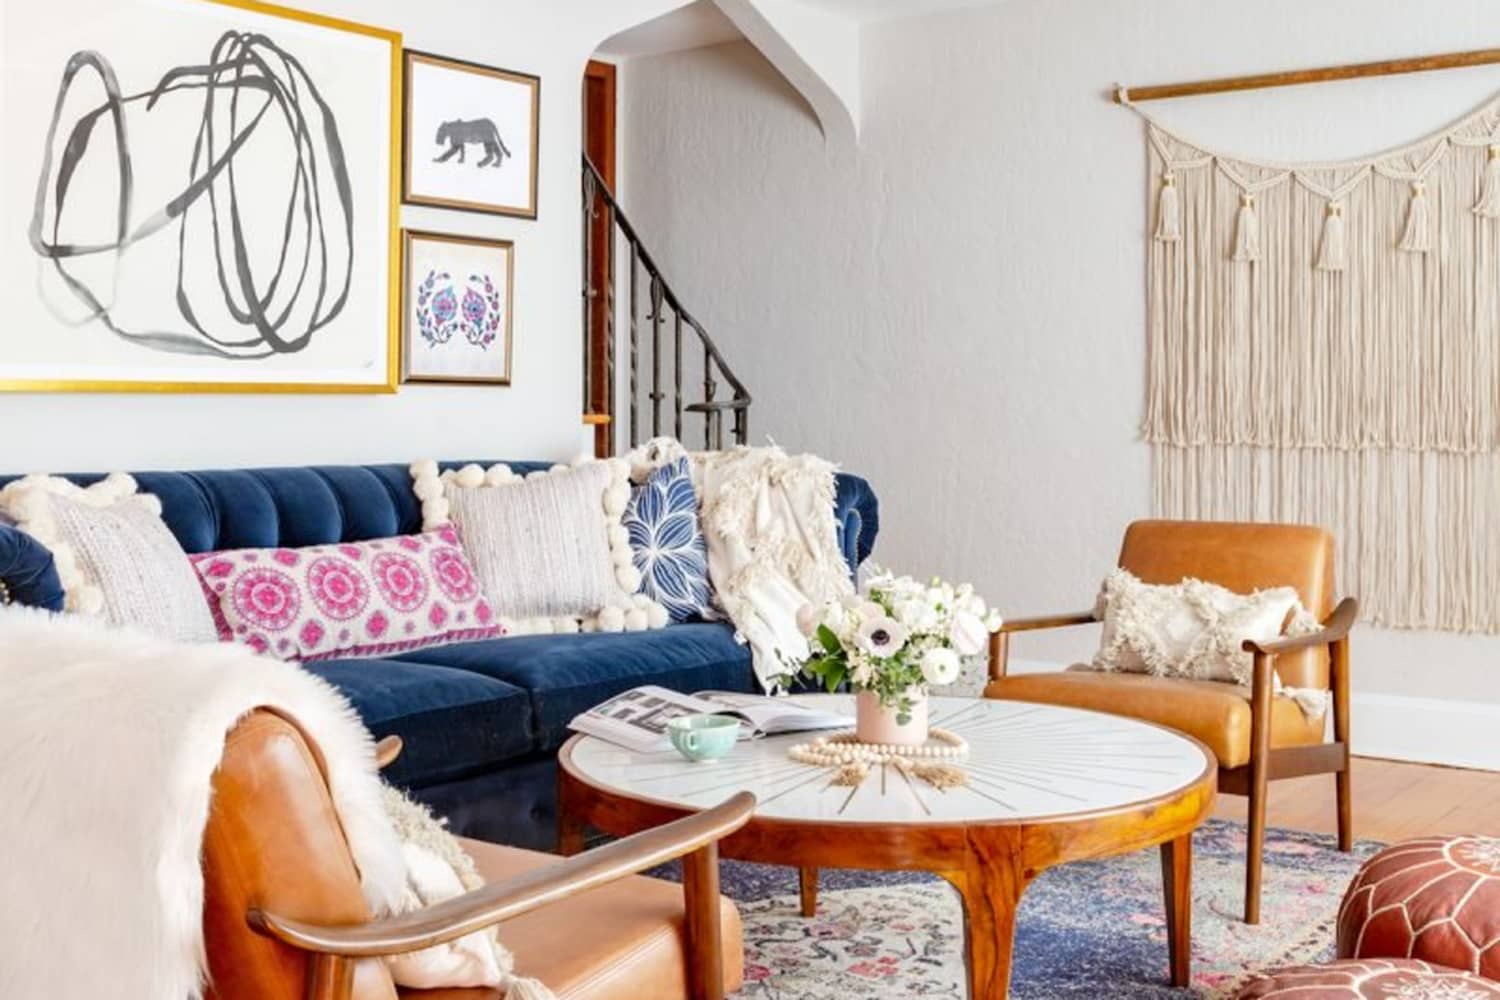 This 1930s House Is an Inspiring Guide to Mixing Inherited Furniture, Color, and Boho Vibes